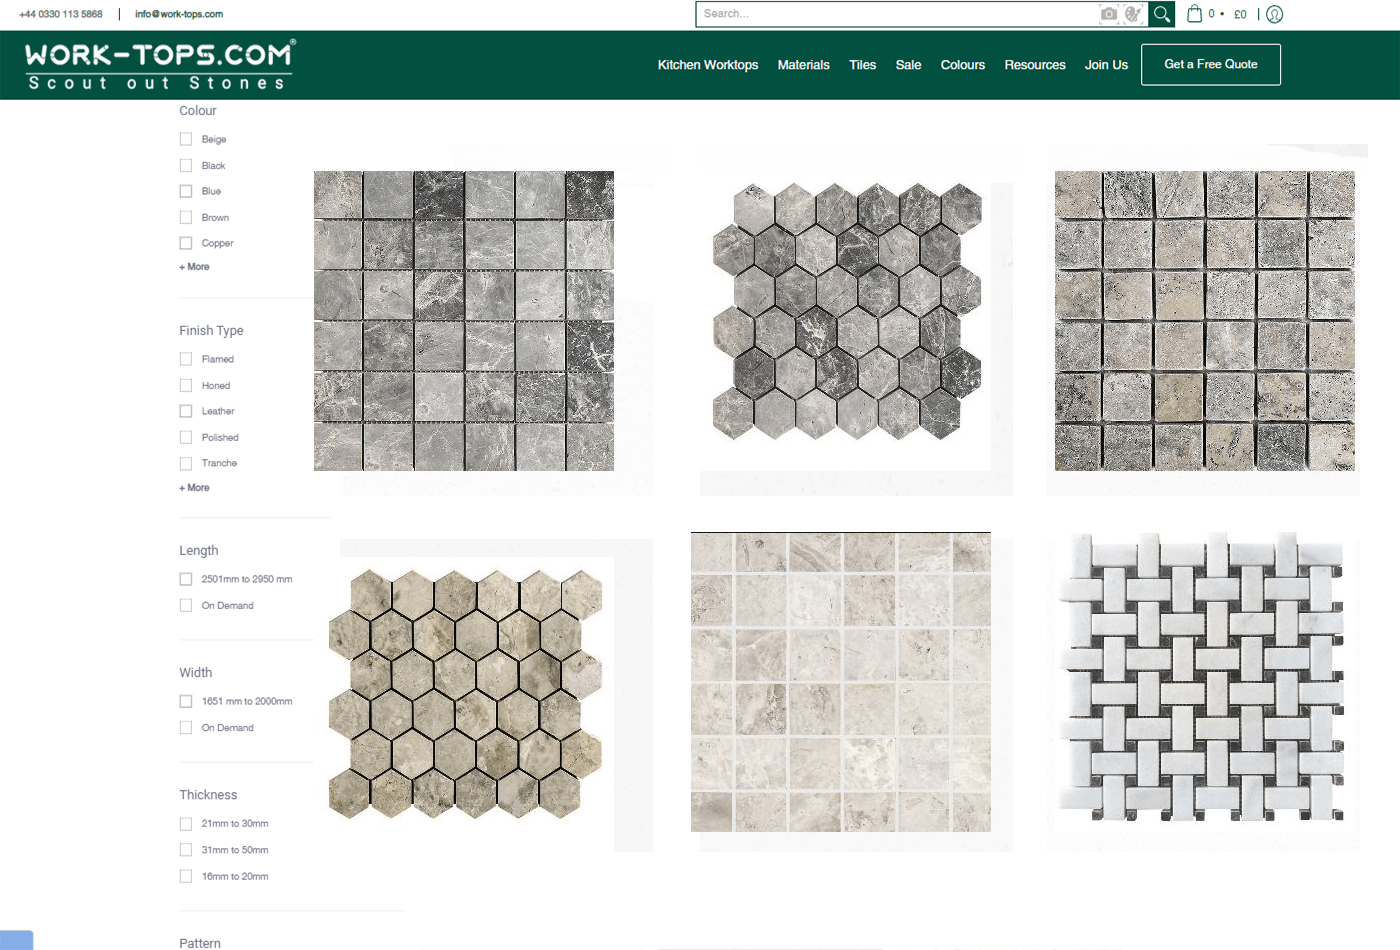 Other Mosaic Tile Products